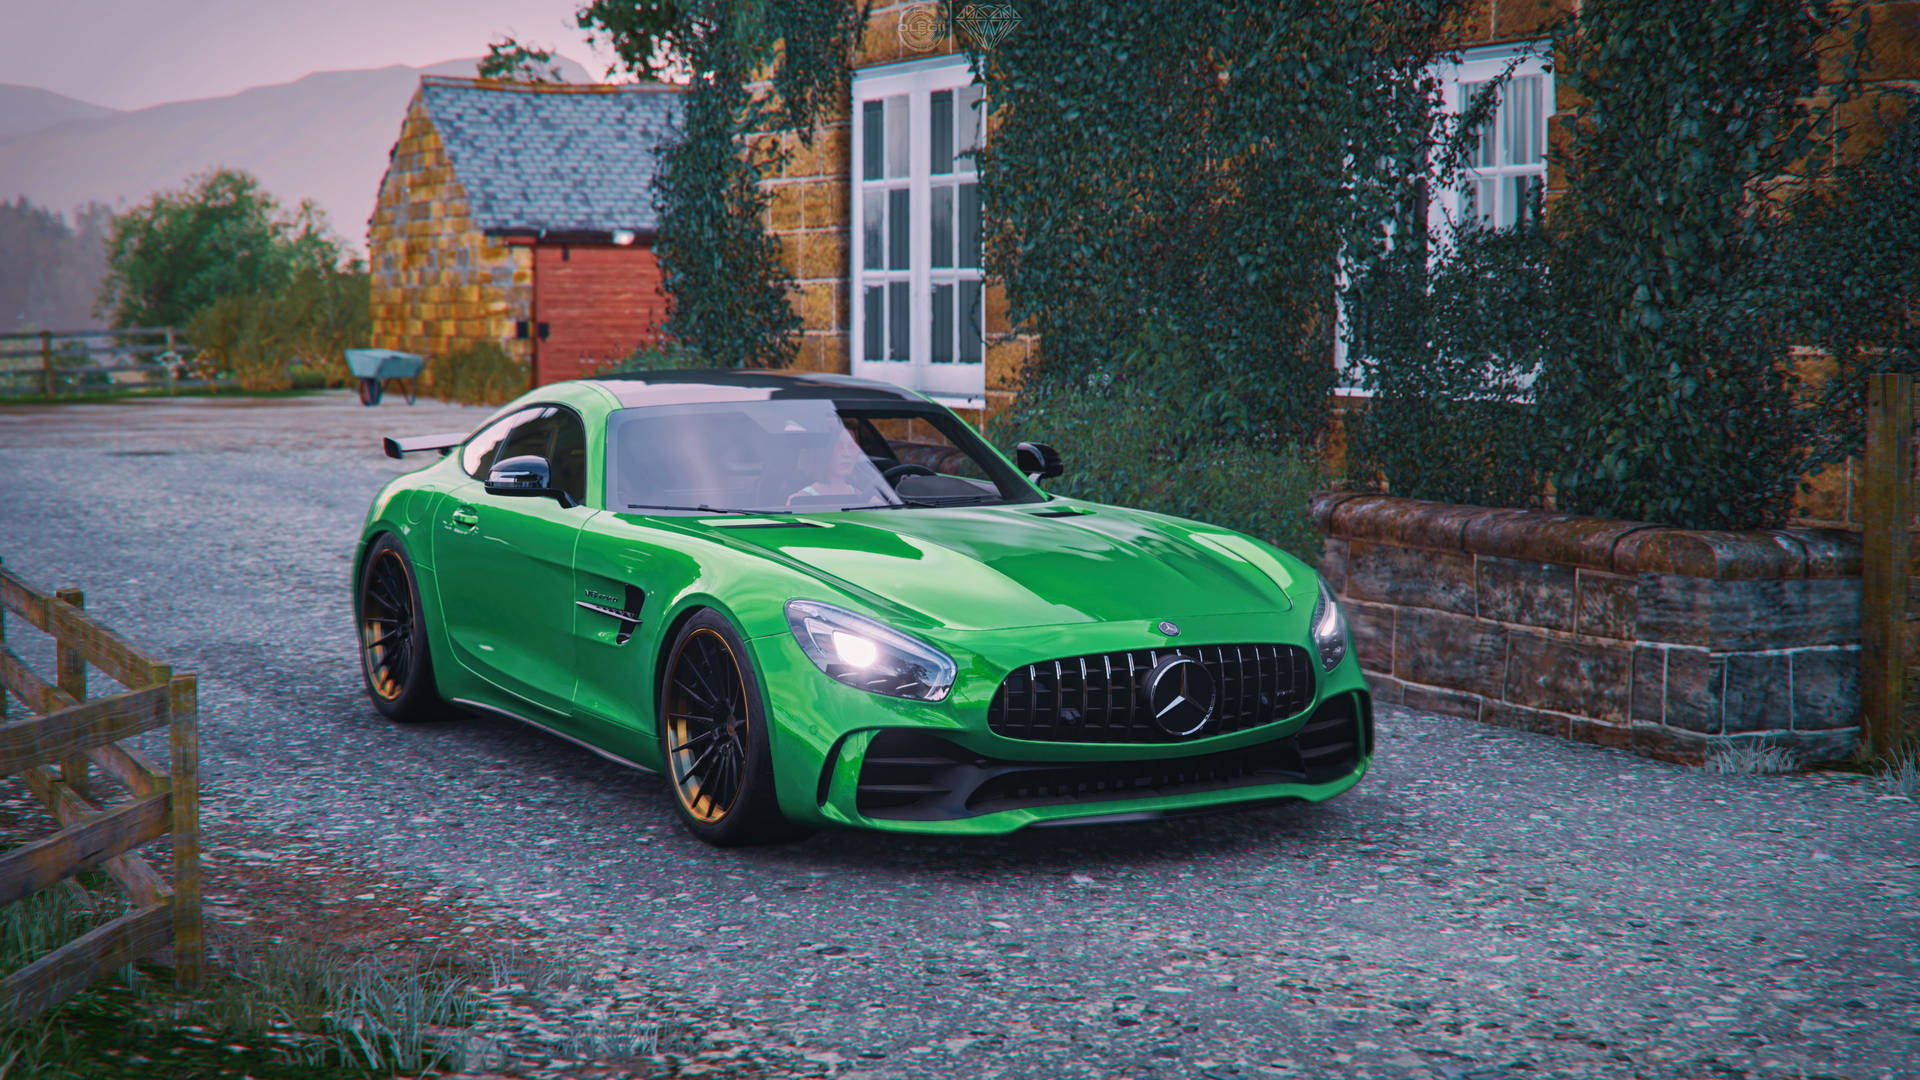 Caption: Exceptional Performance - Mercedes AMG in Forza Horizon 4 Wallpaper